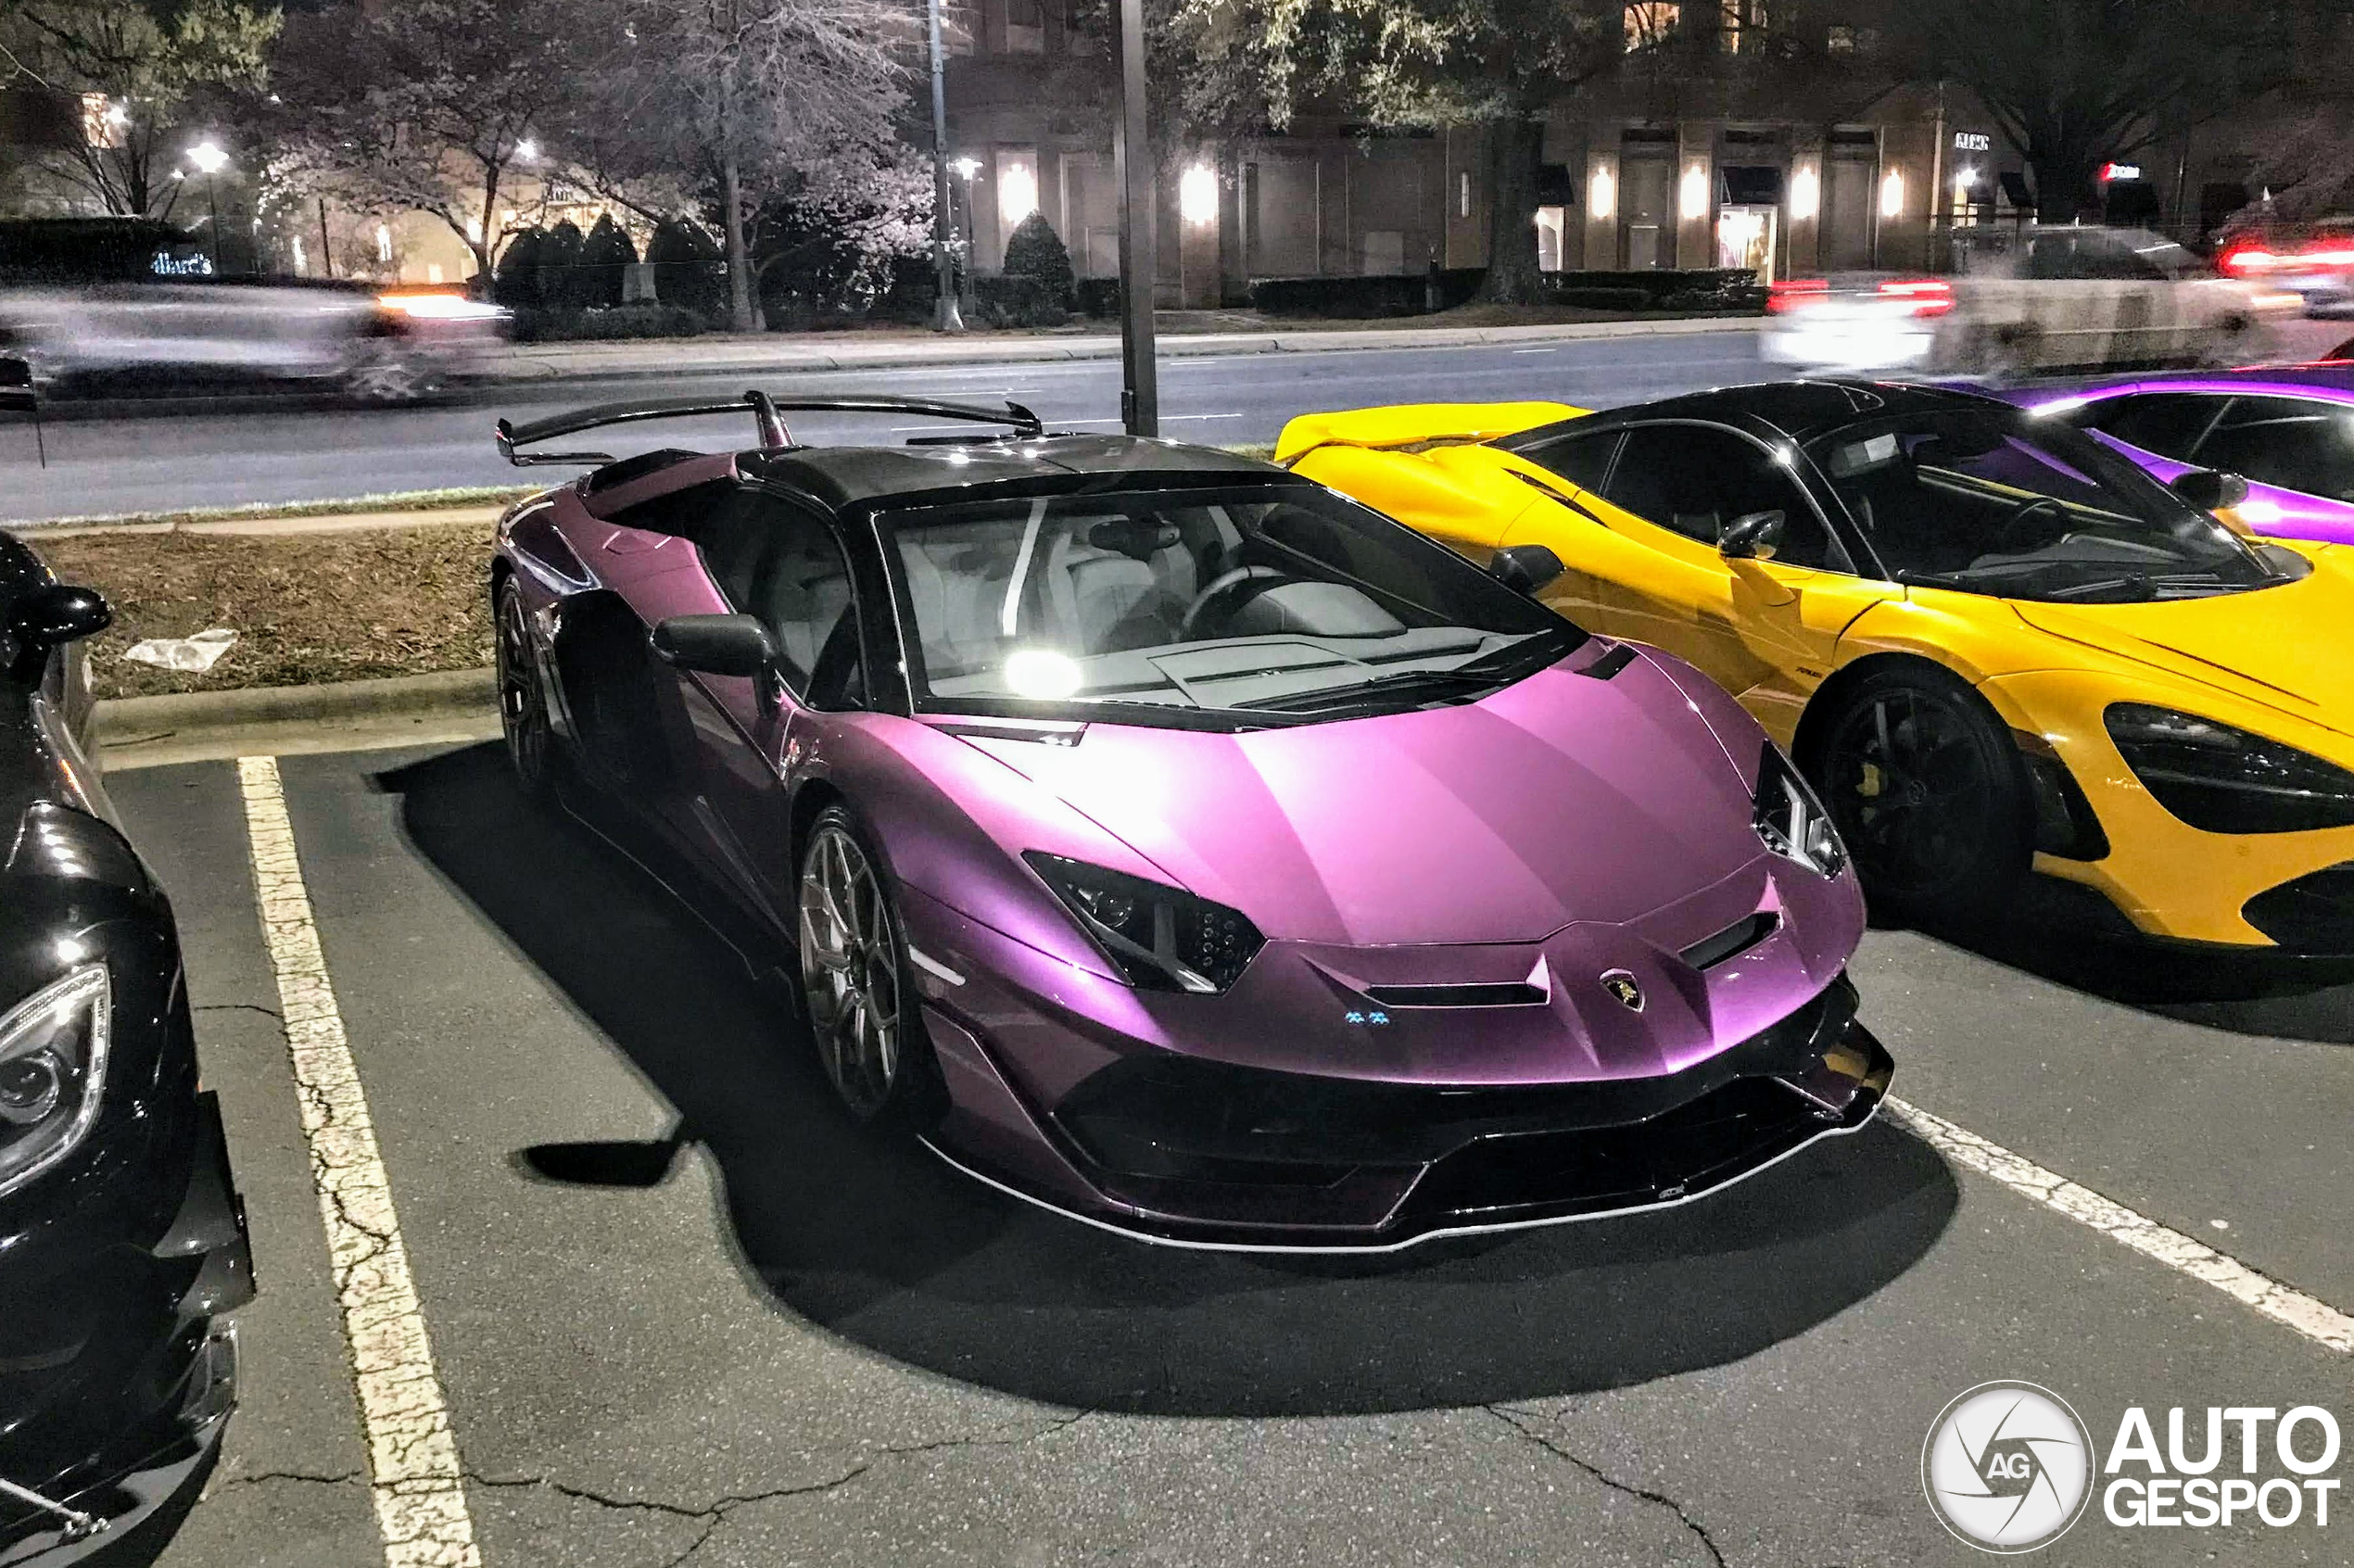 Is this the most beautiful color that Lamborghini has to offer?